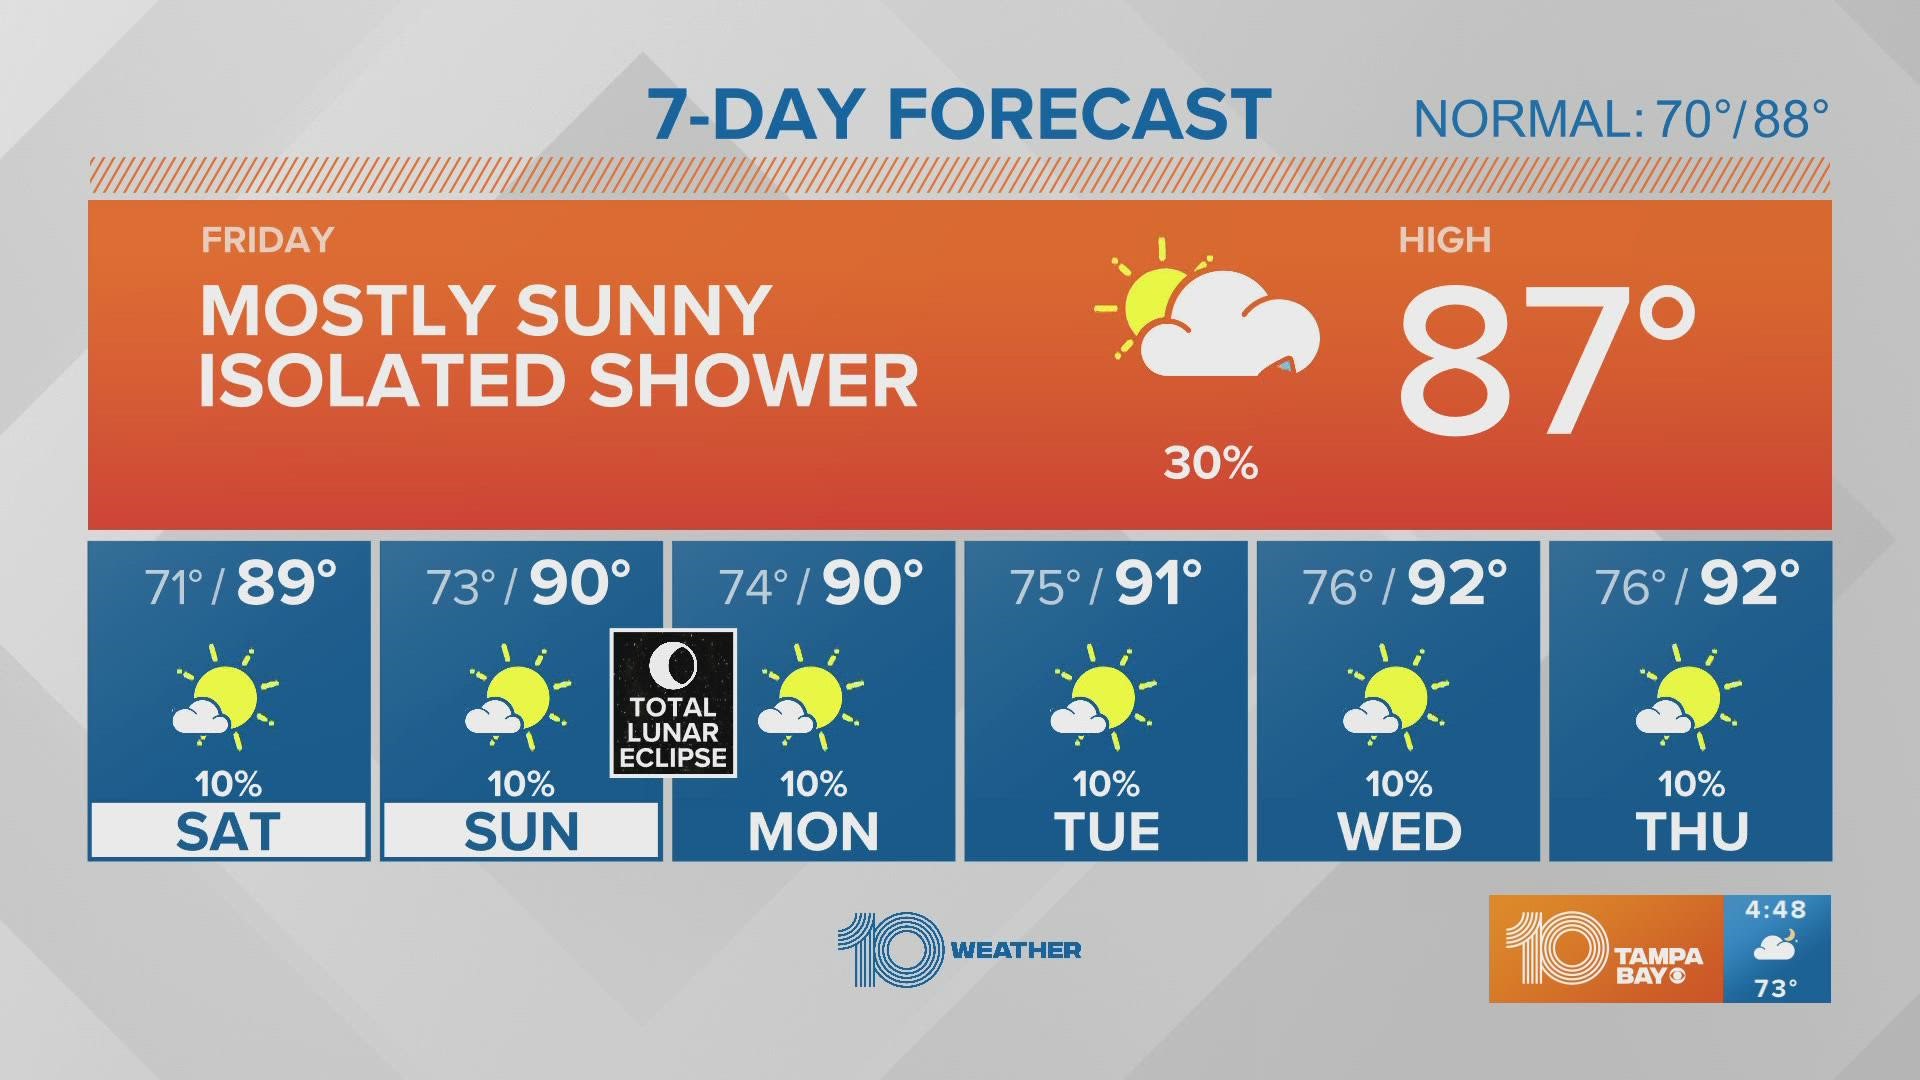 More humidity, upper 80s and small rain chances to finish the workweek.